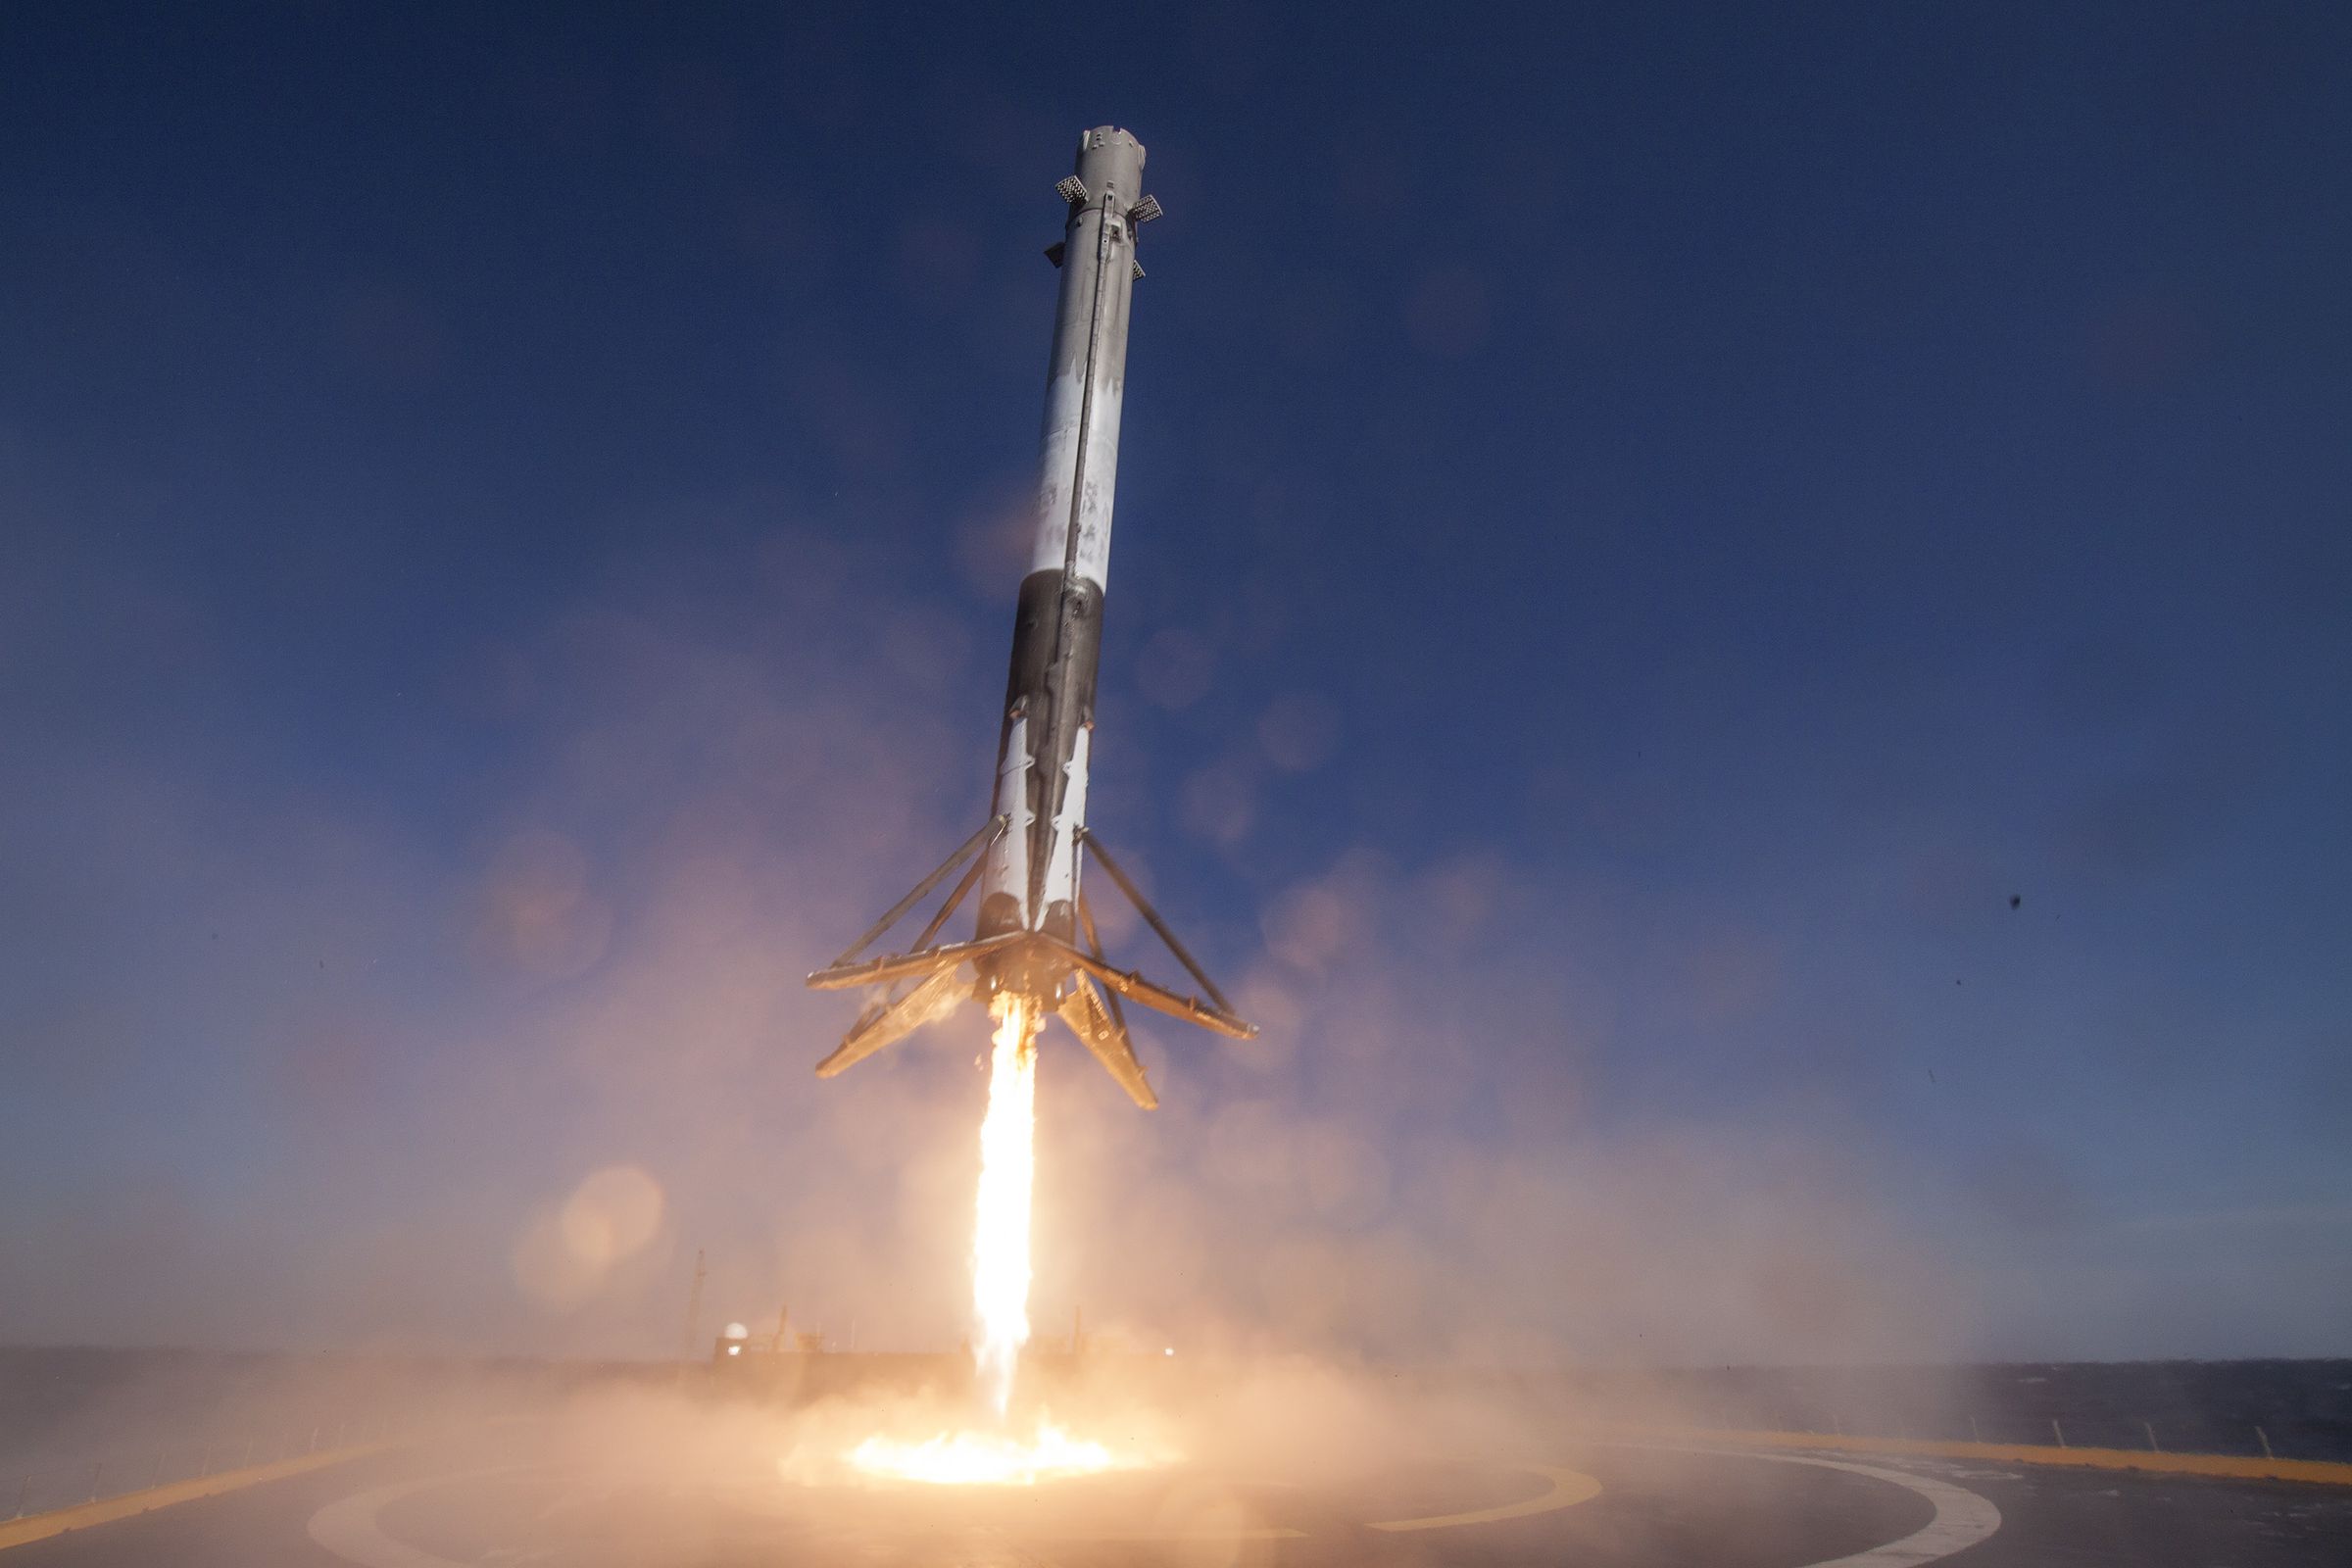 The Falcon 9 first stage that is relaunching this week.